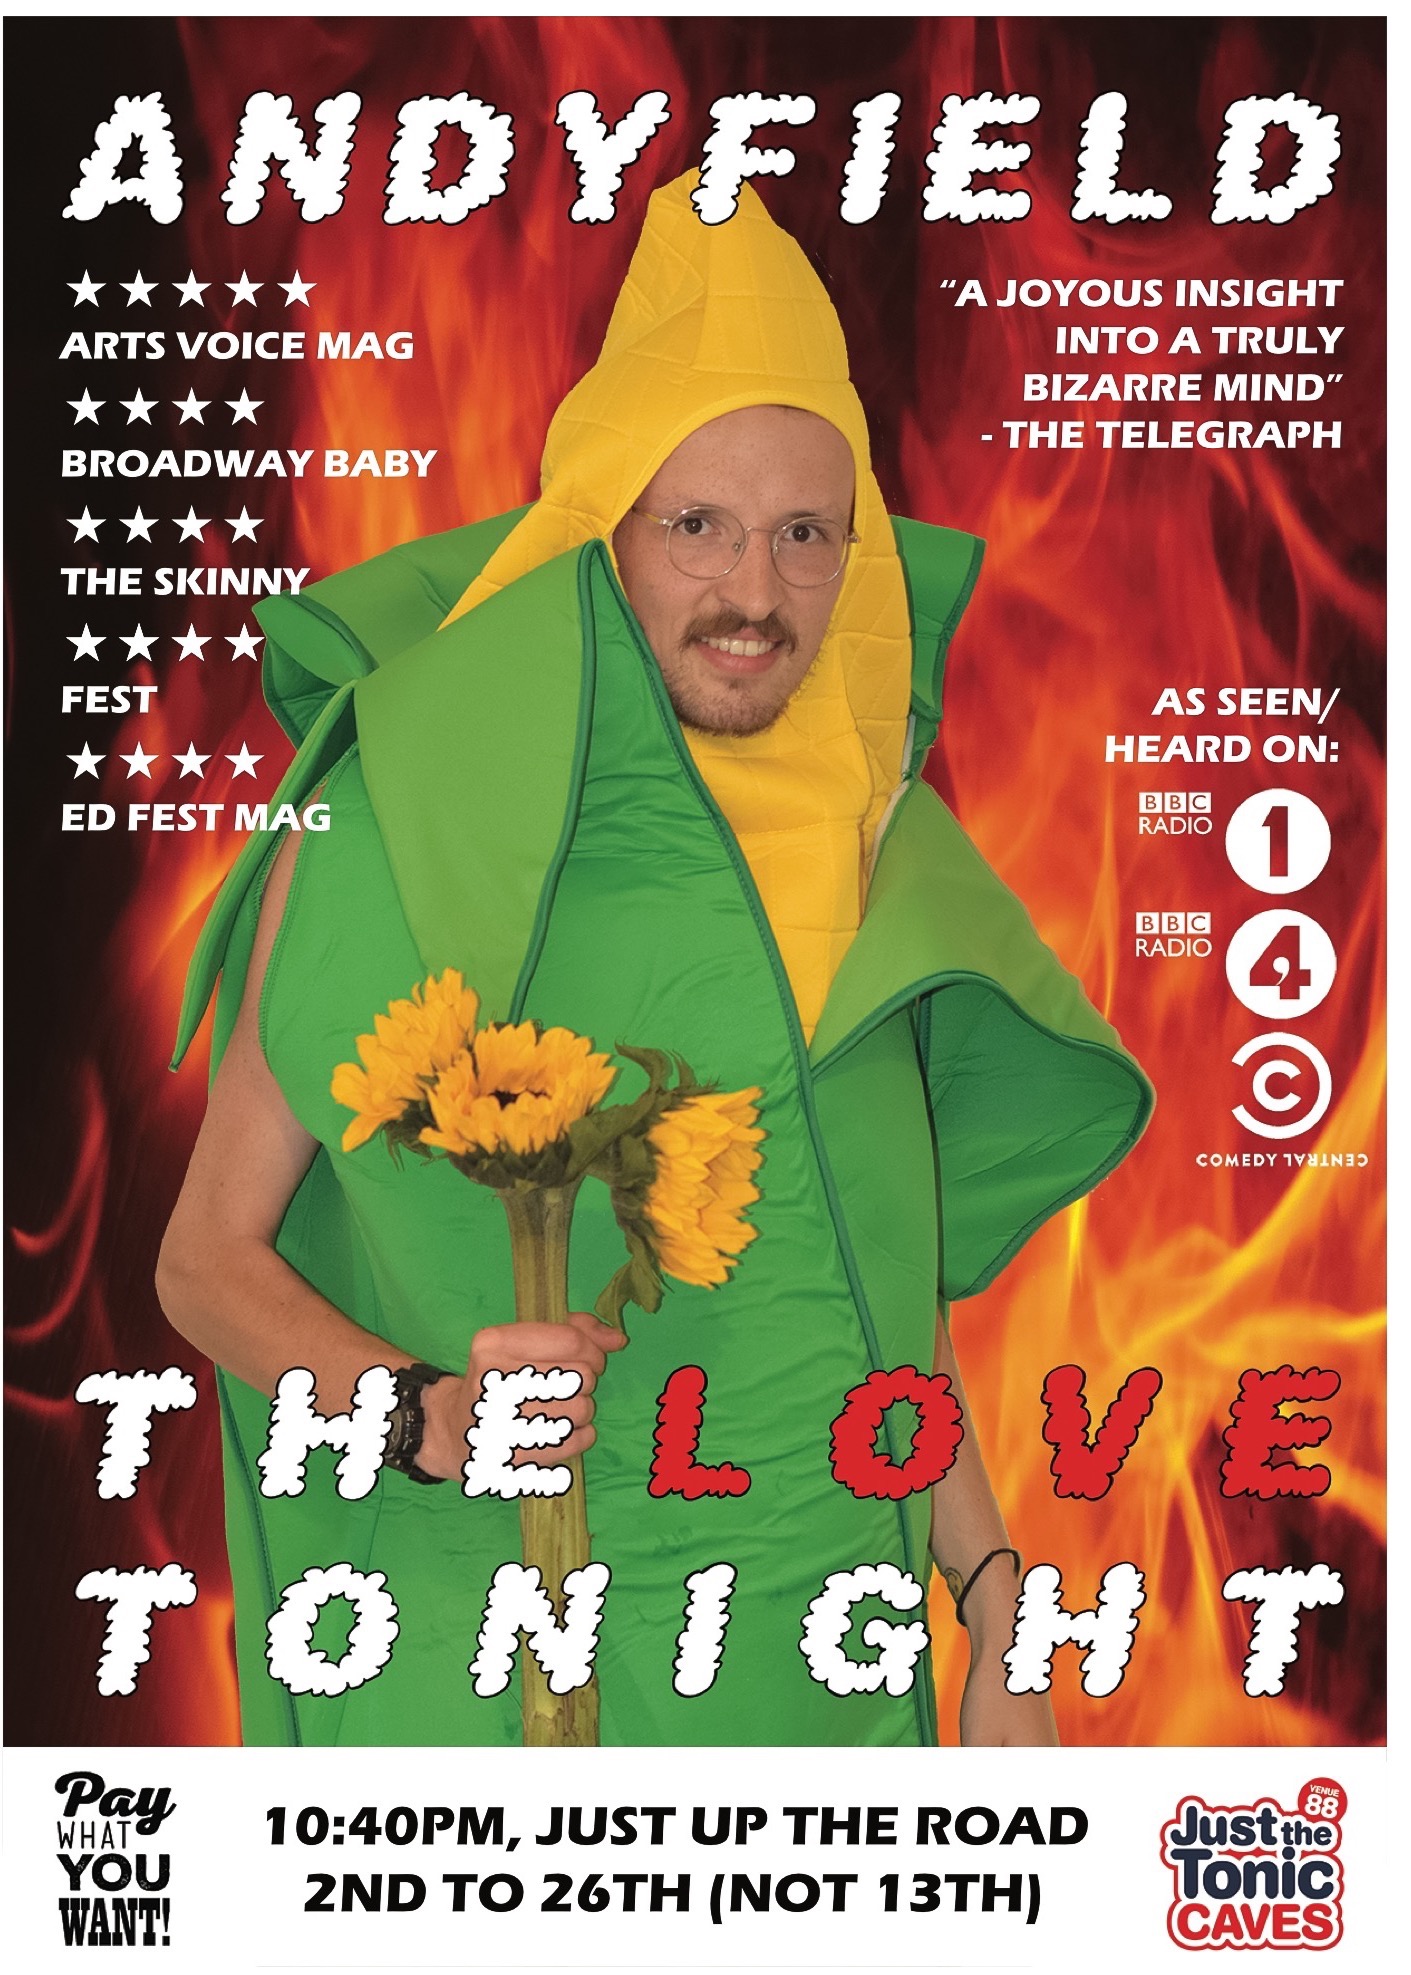 The poster for Andy Field the Love Tonight